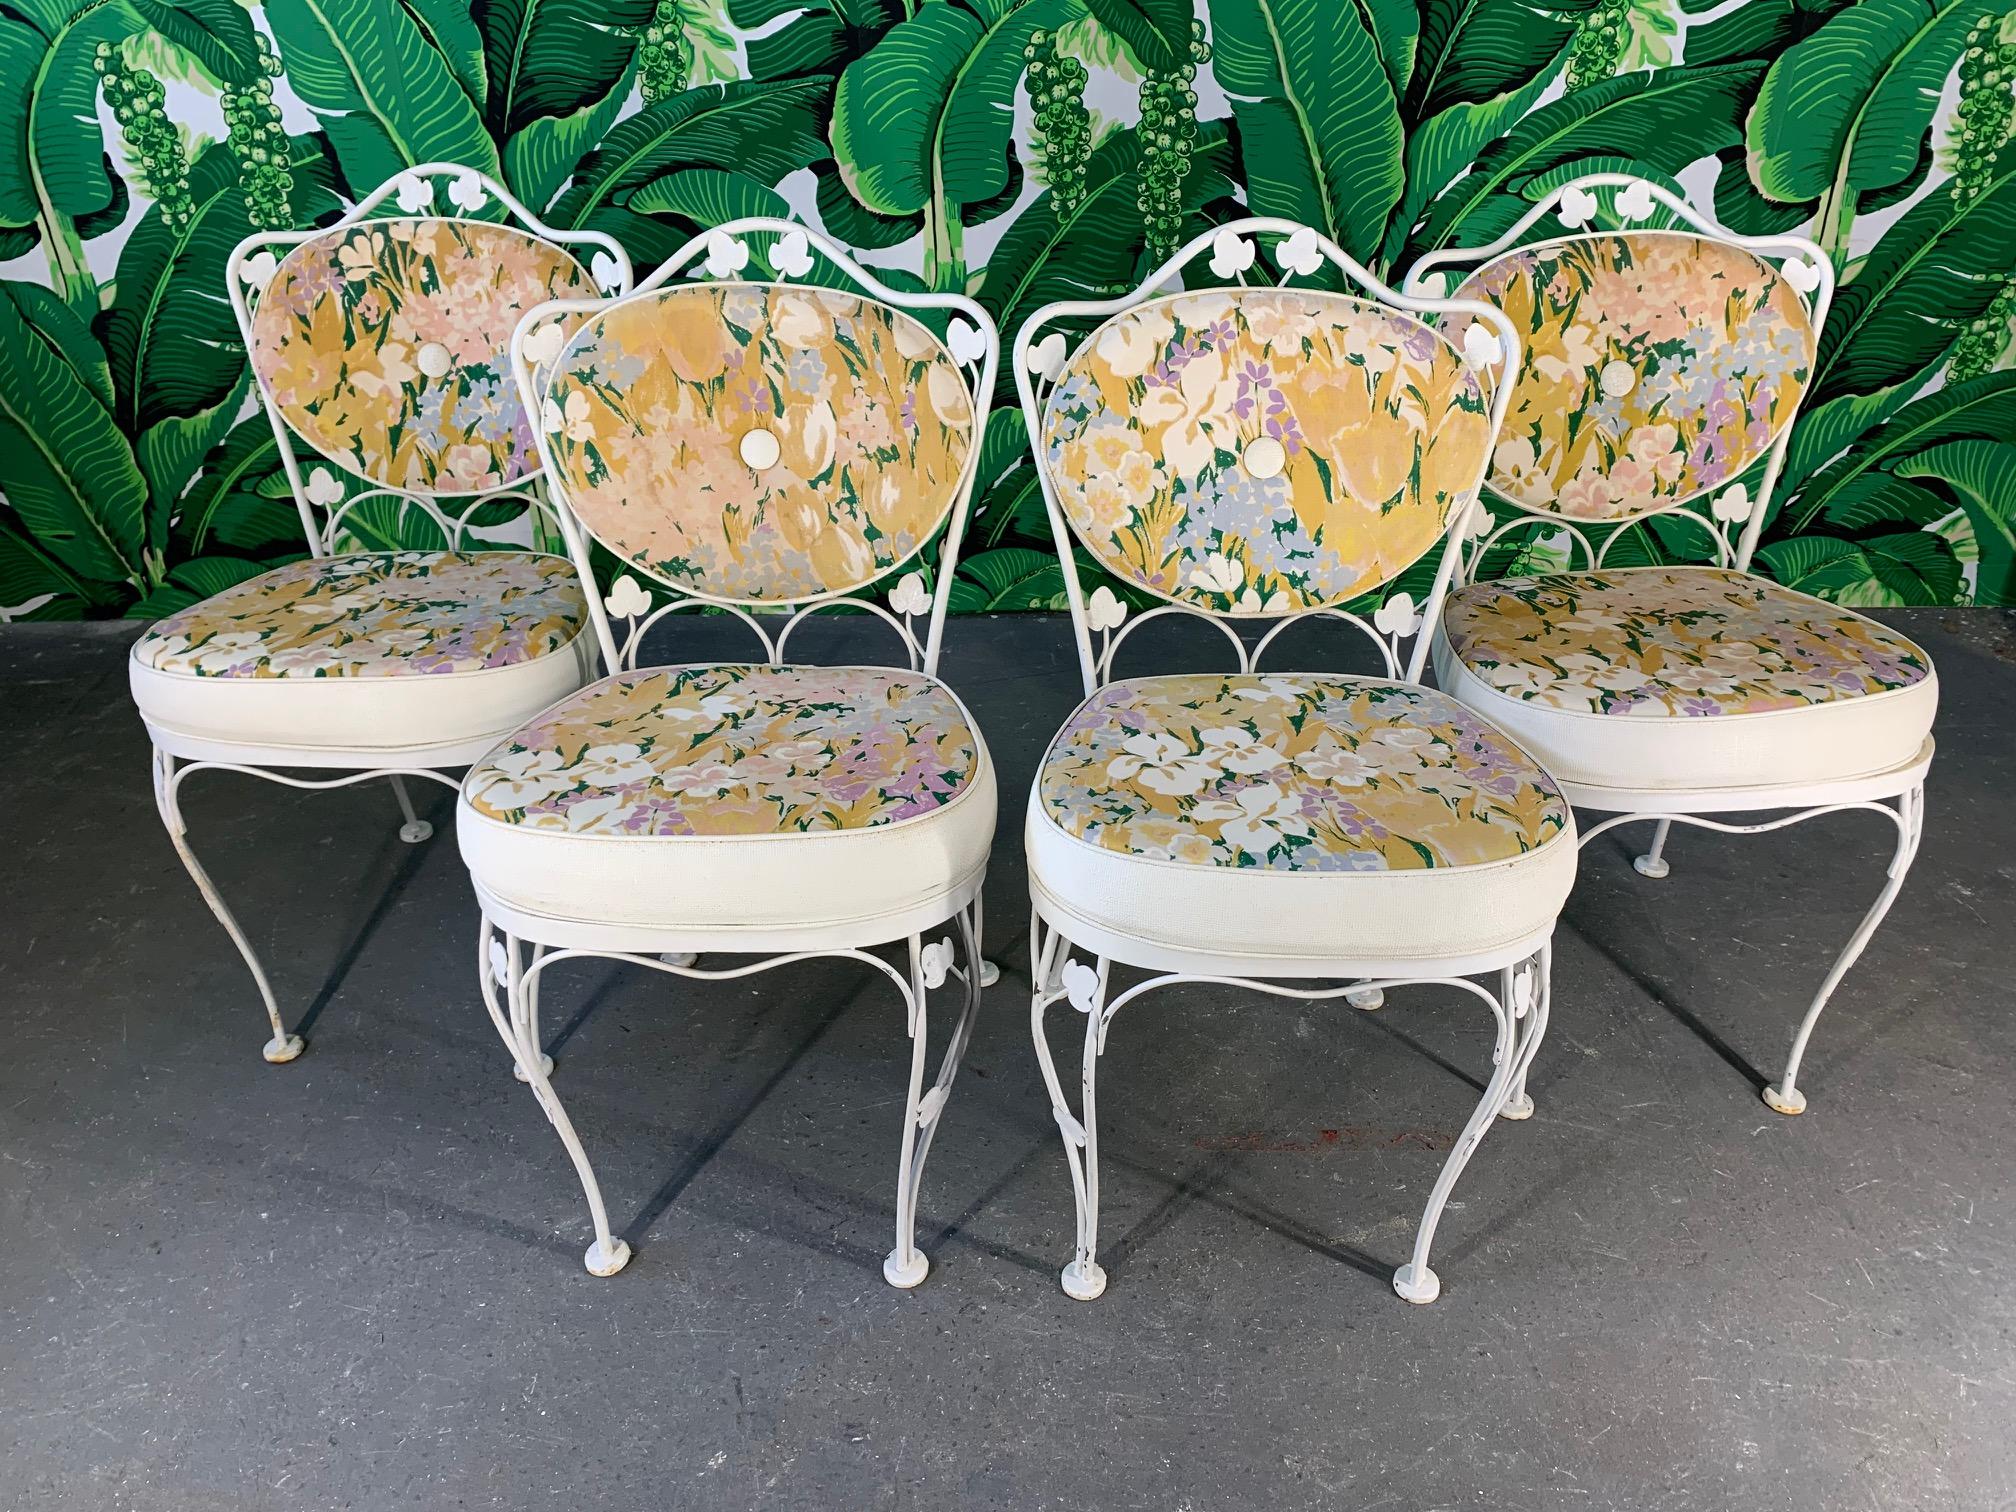 Vintage wrought iron patio set by Lee Woodard and Sons (father of Russell Woodard) features original floral upholstery and decorative ivy detailing. Includes 4 wrought iron chairs and an all-aluminum table. Good vintage condition with imperfections